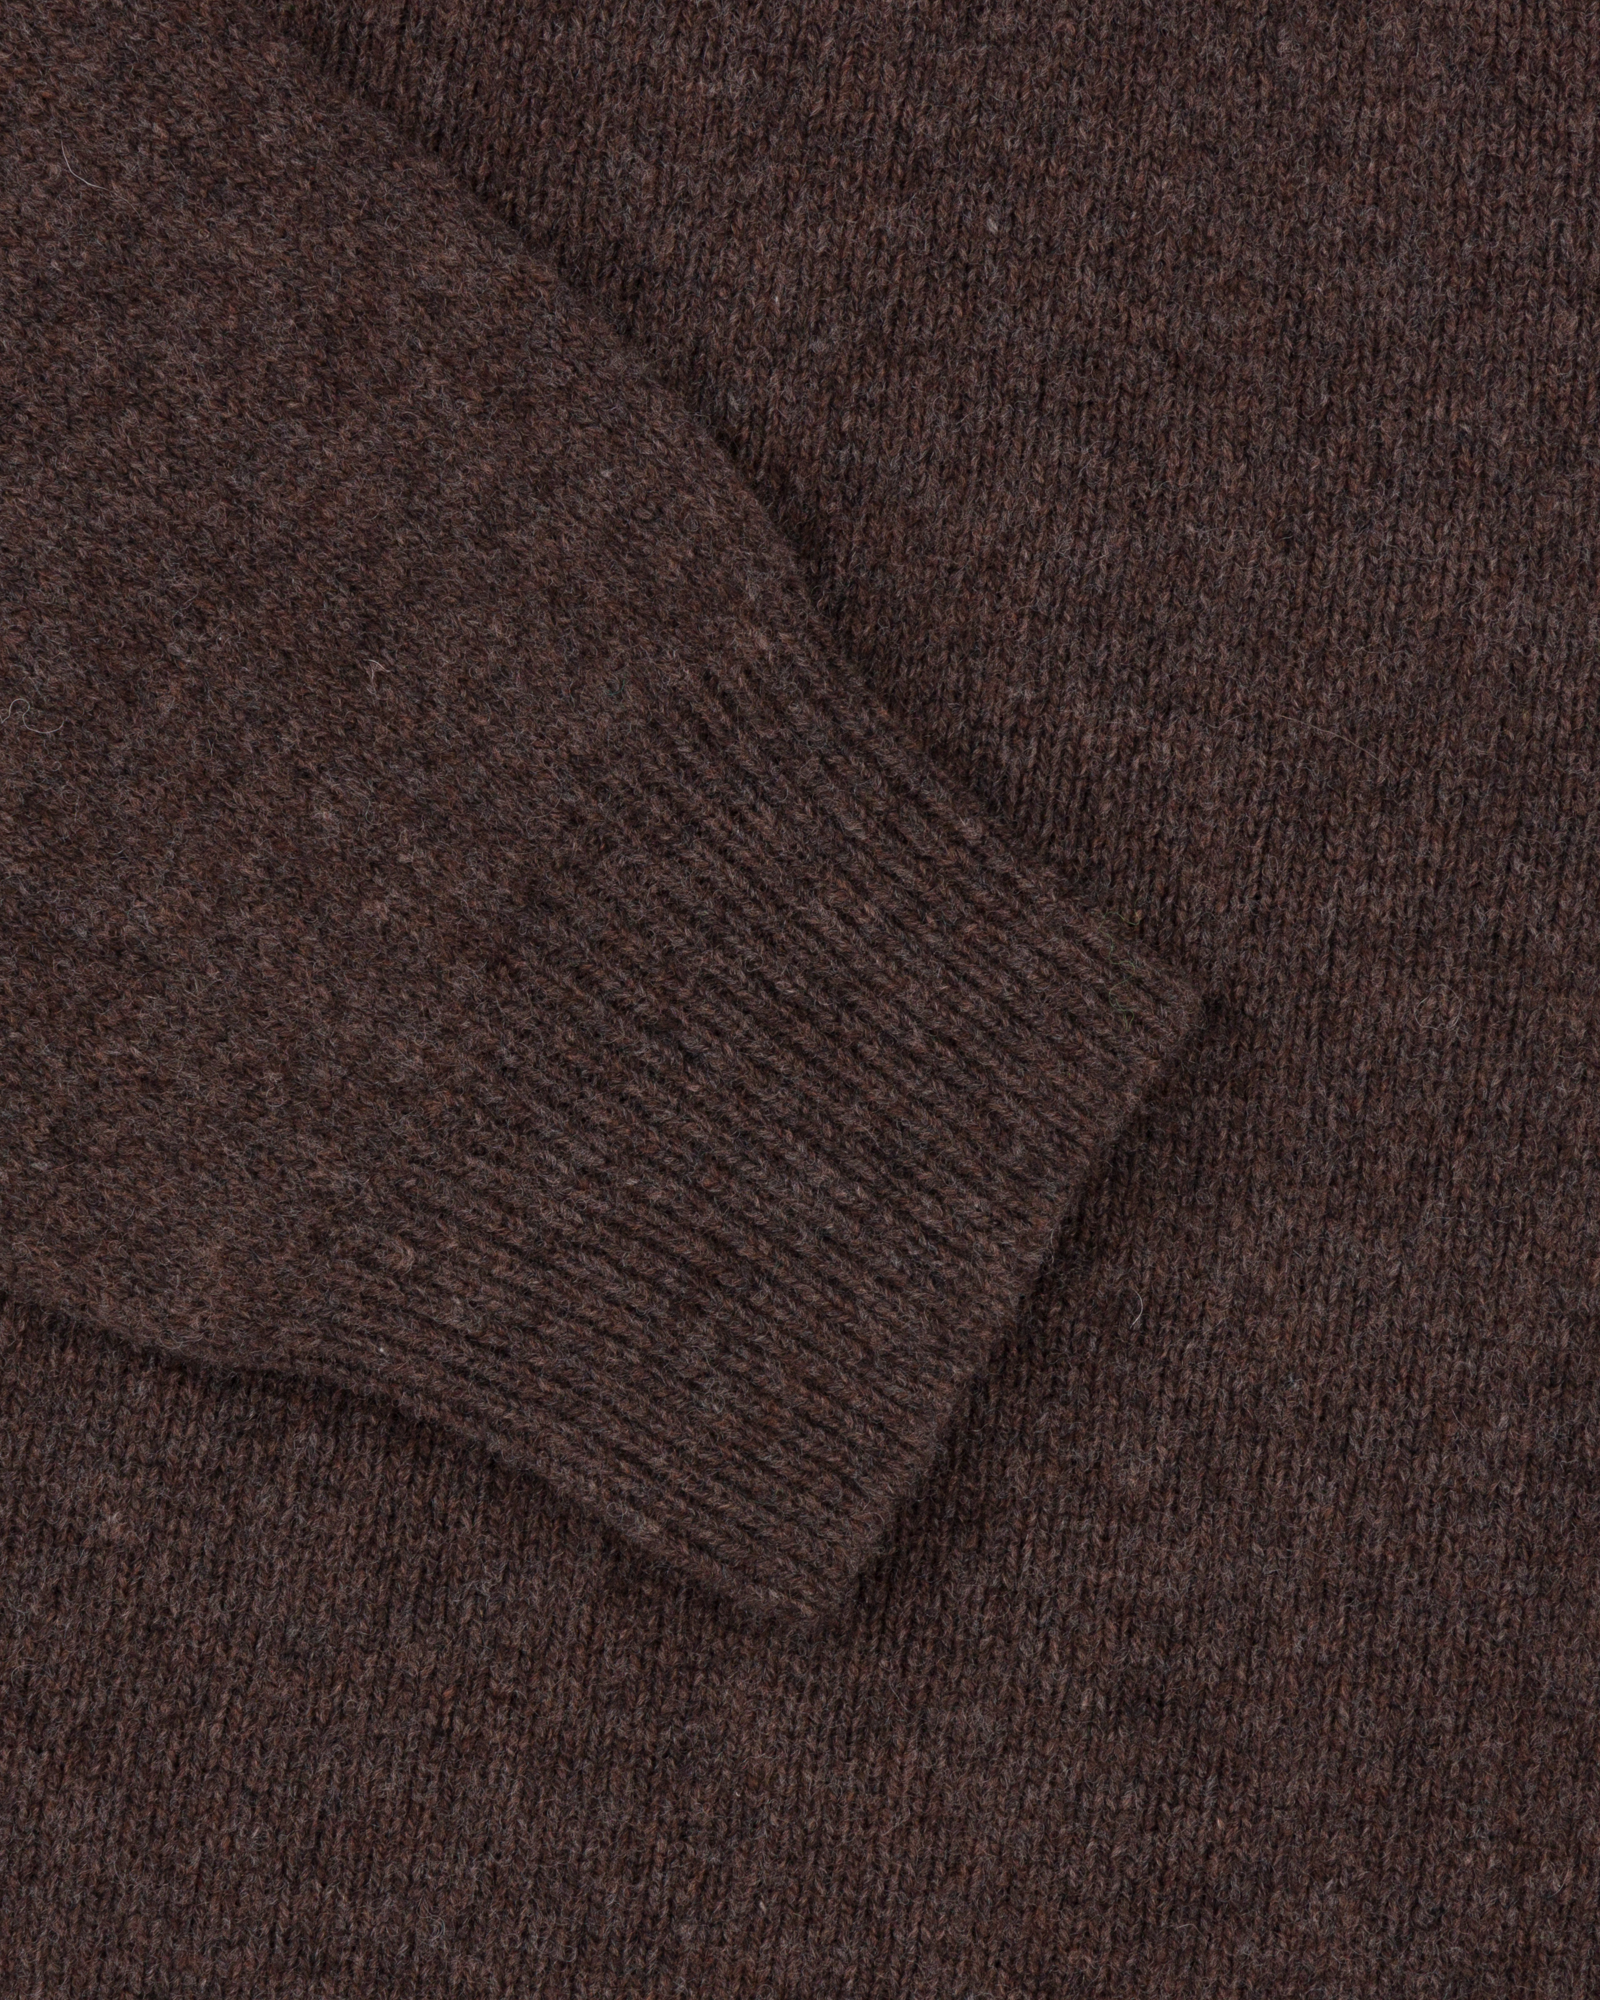 Lambswool Roll Neck Sweater - Brown